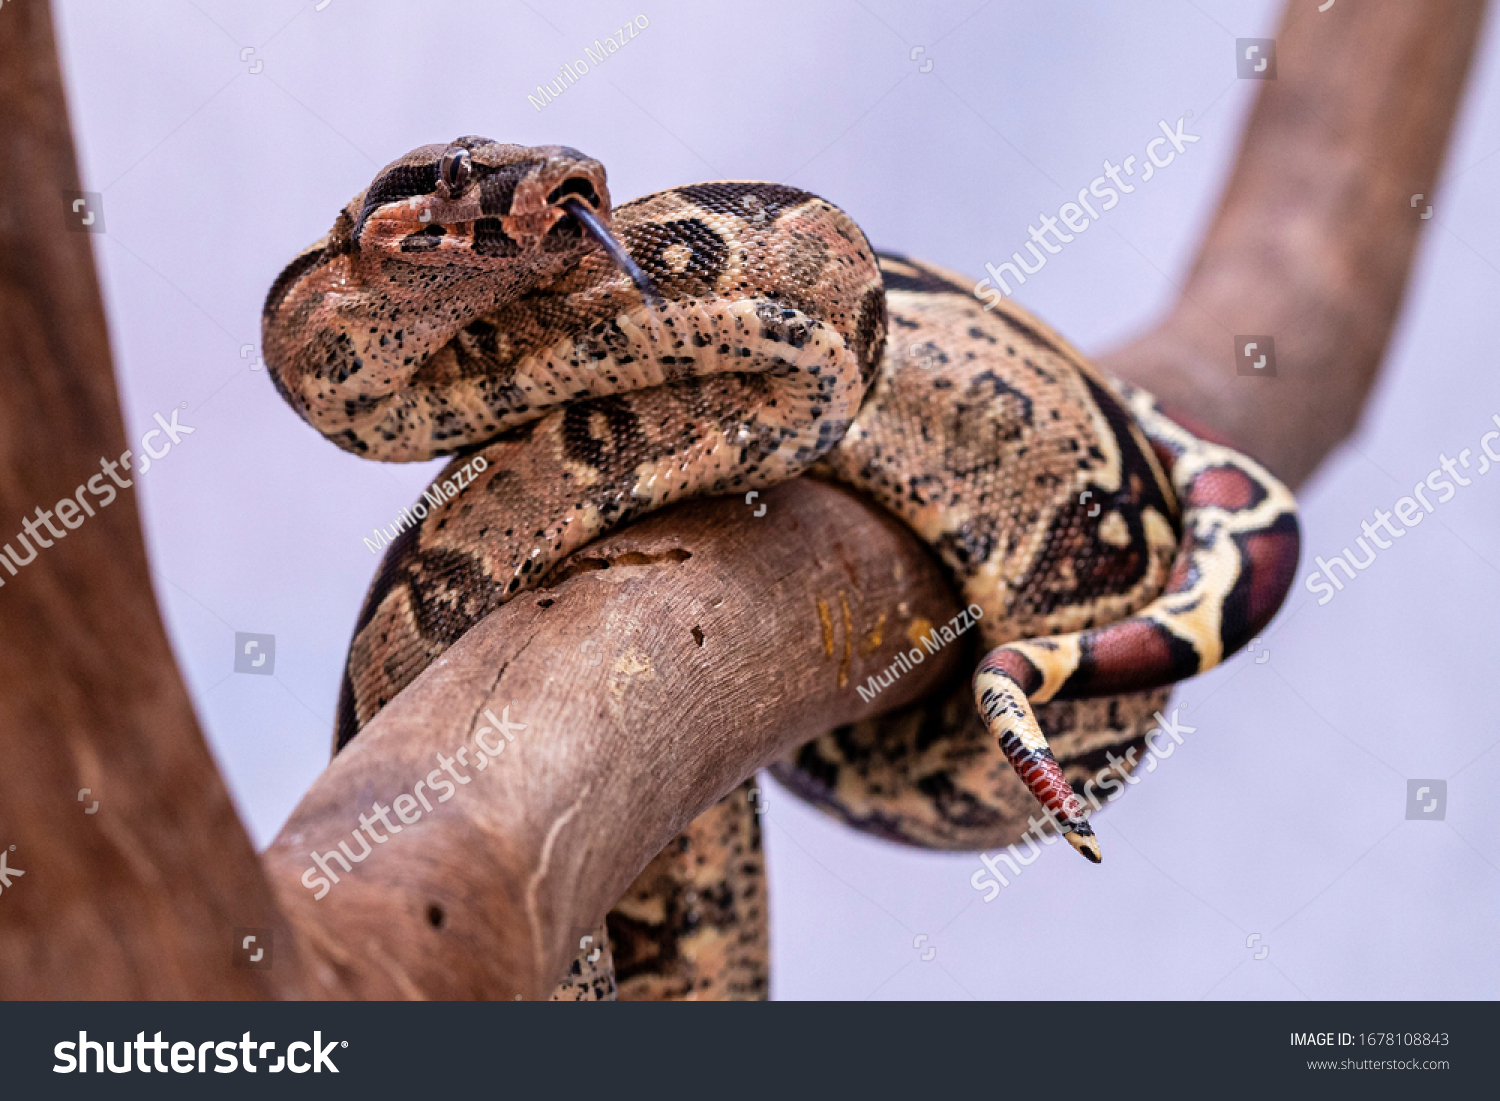 The boa constrictor (Boa constrictor), also called the red-tailed boa or the common boa, is a species of large, non-venomous, heavy-bodied snake that is frequently kept and bred in captivity #1678108843